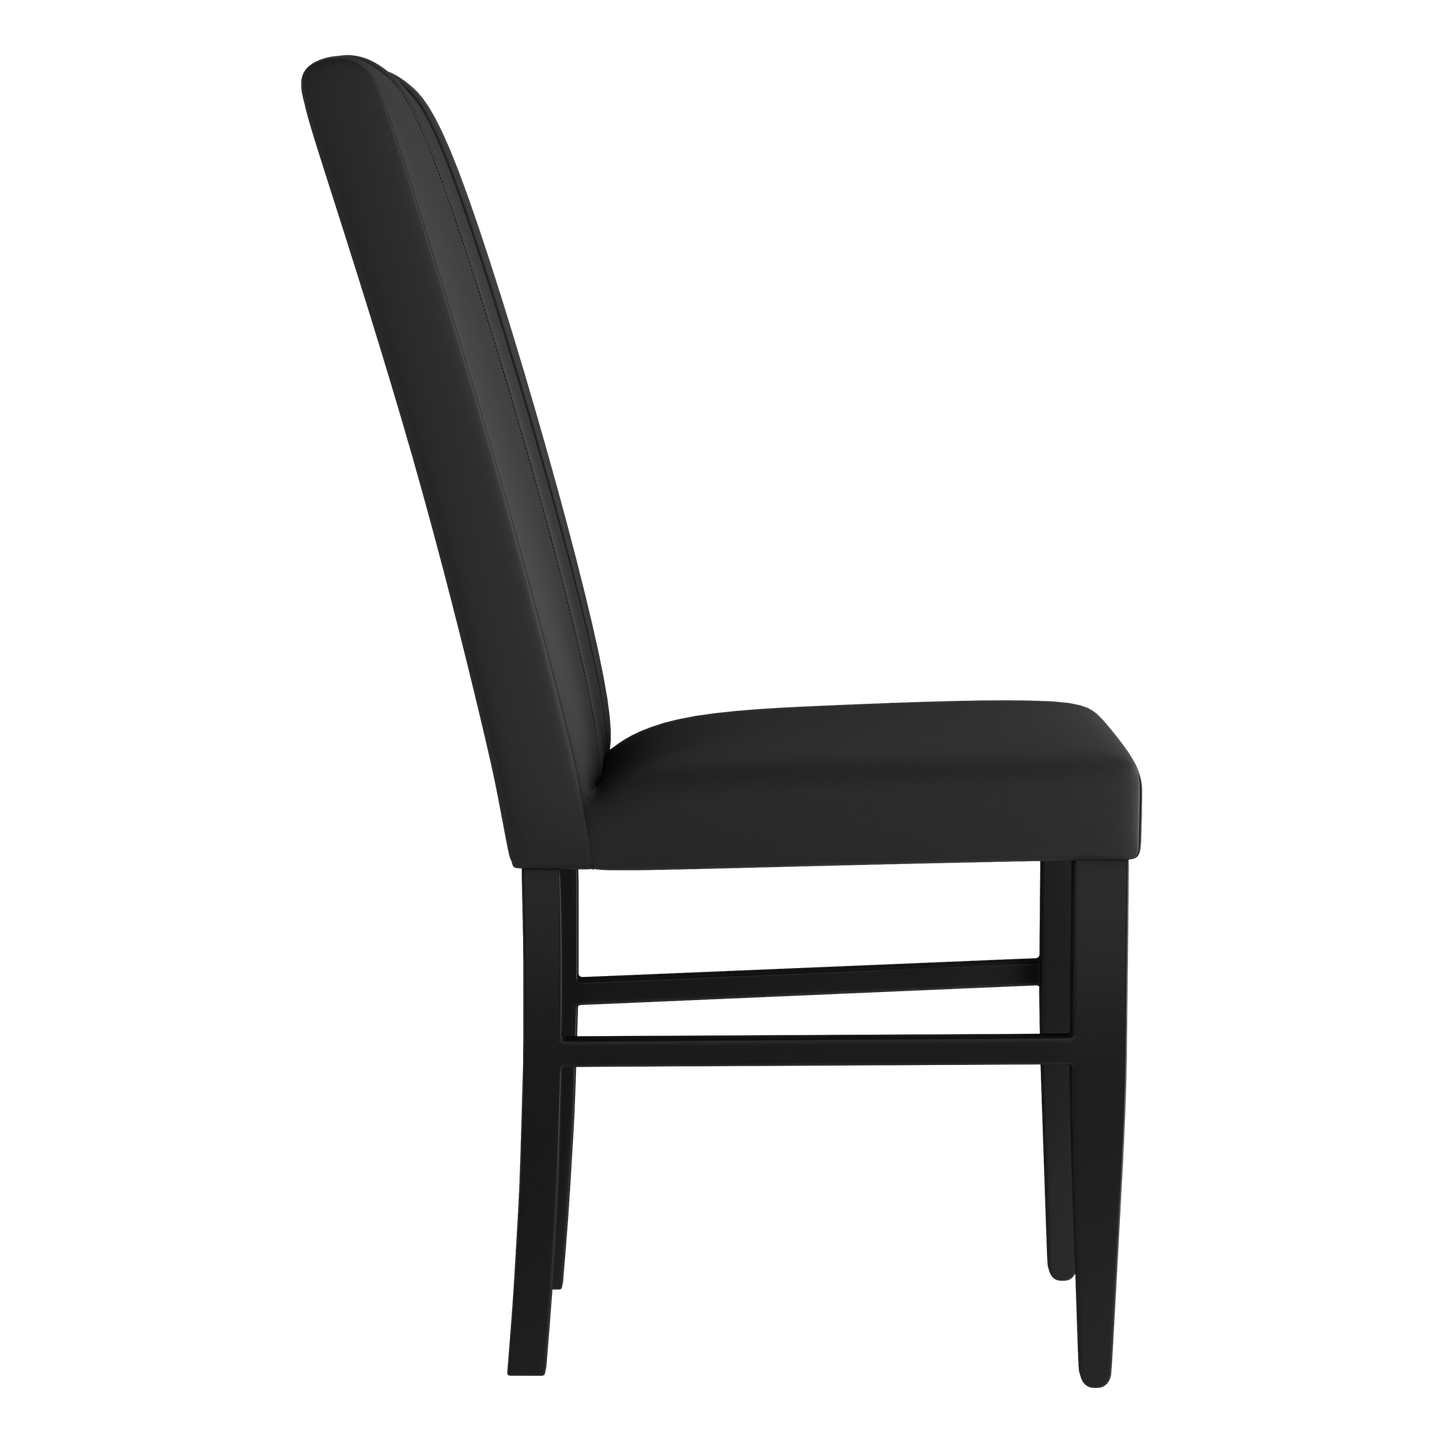 Side Chair 2000 with Florida Panthers Logo Set of 2